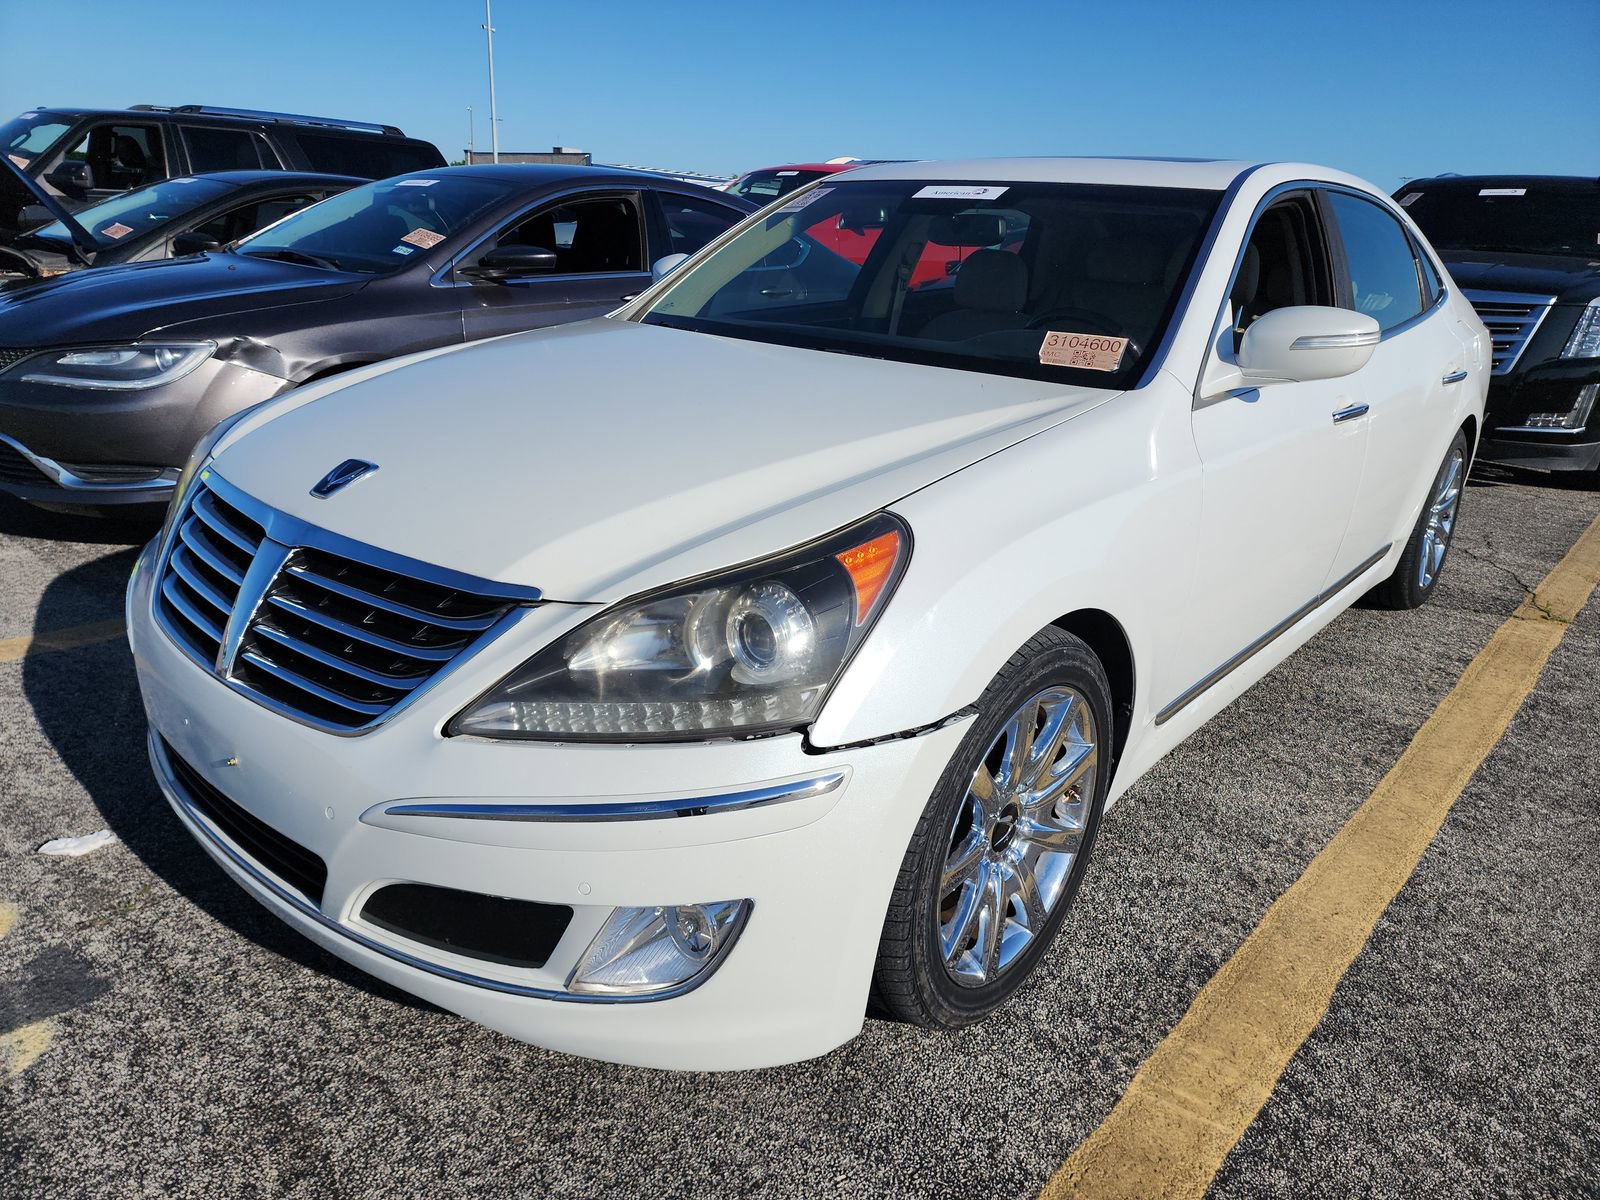 Used 2013 Hyundai Equus for Sale in Lawrenceville, GA (Test Drive at Home)  - Kelley Blue Book